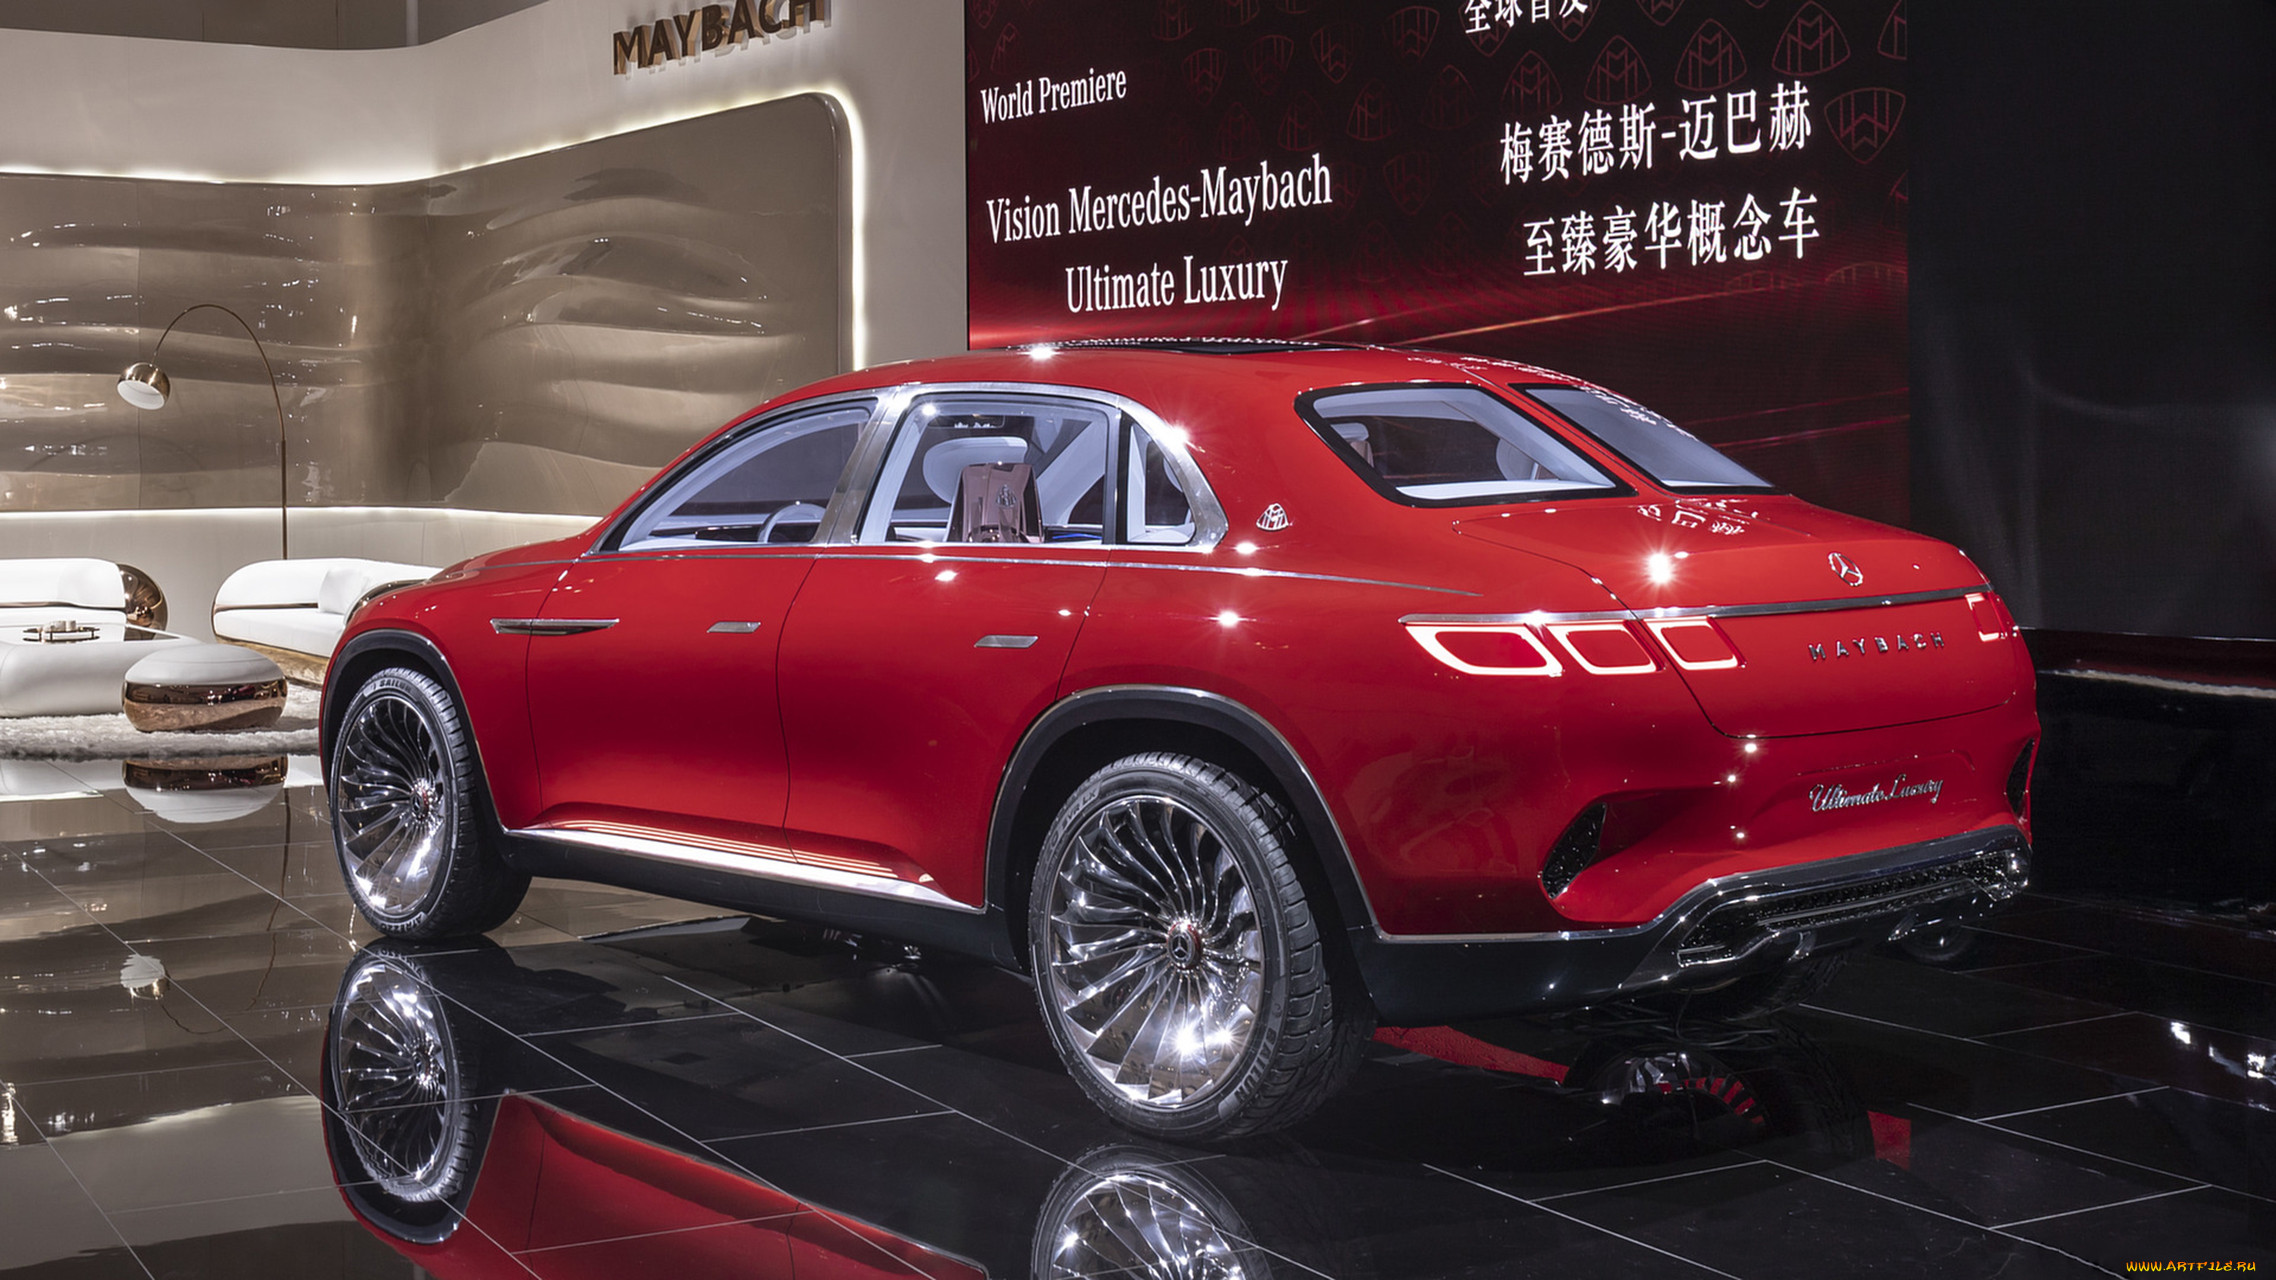 mercedes-maybach vision ultimate luxury suv concept 2018, ,    , concept, suv, 2018, vision, mercedes-maybach, luxury, ultimate